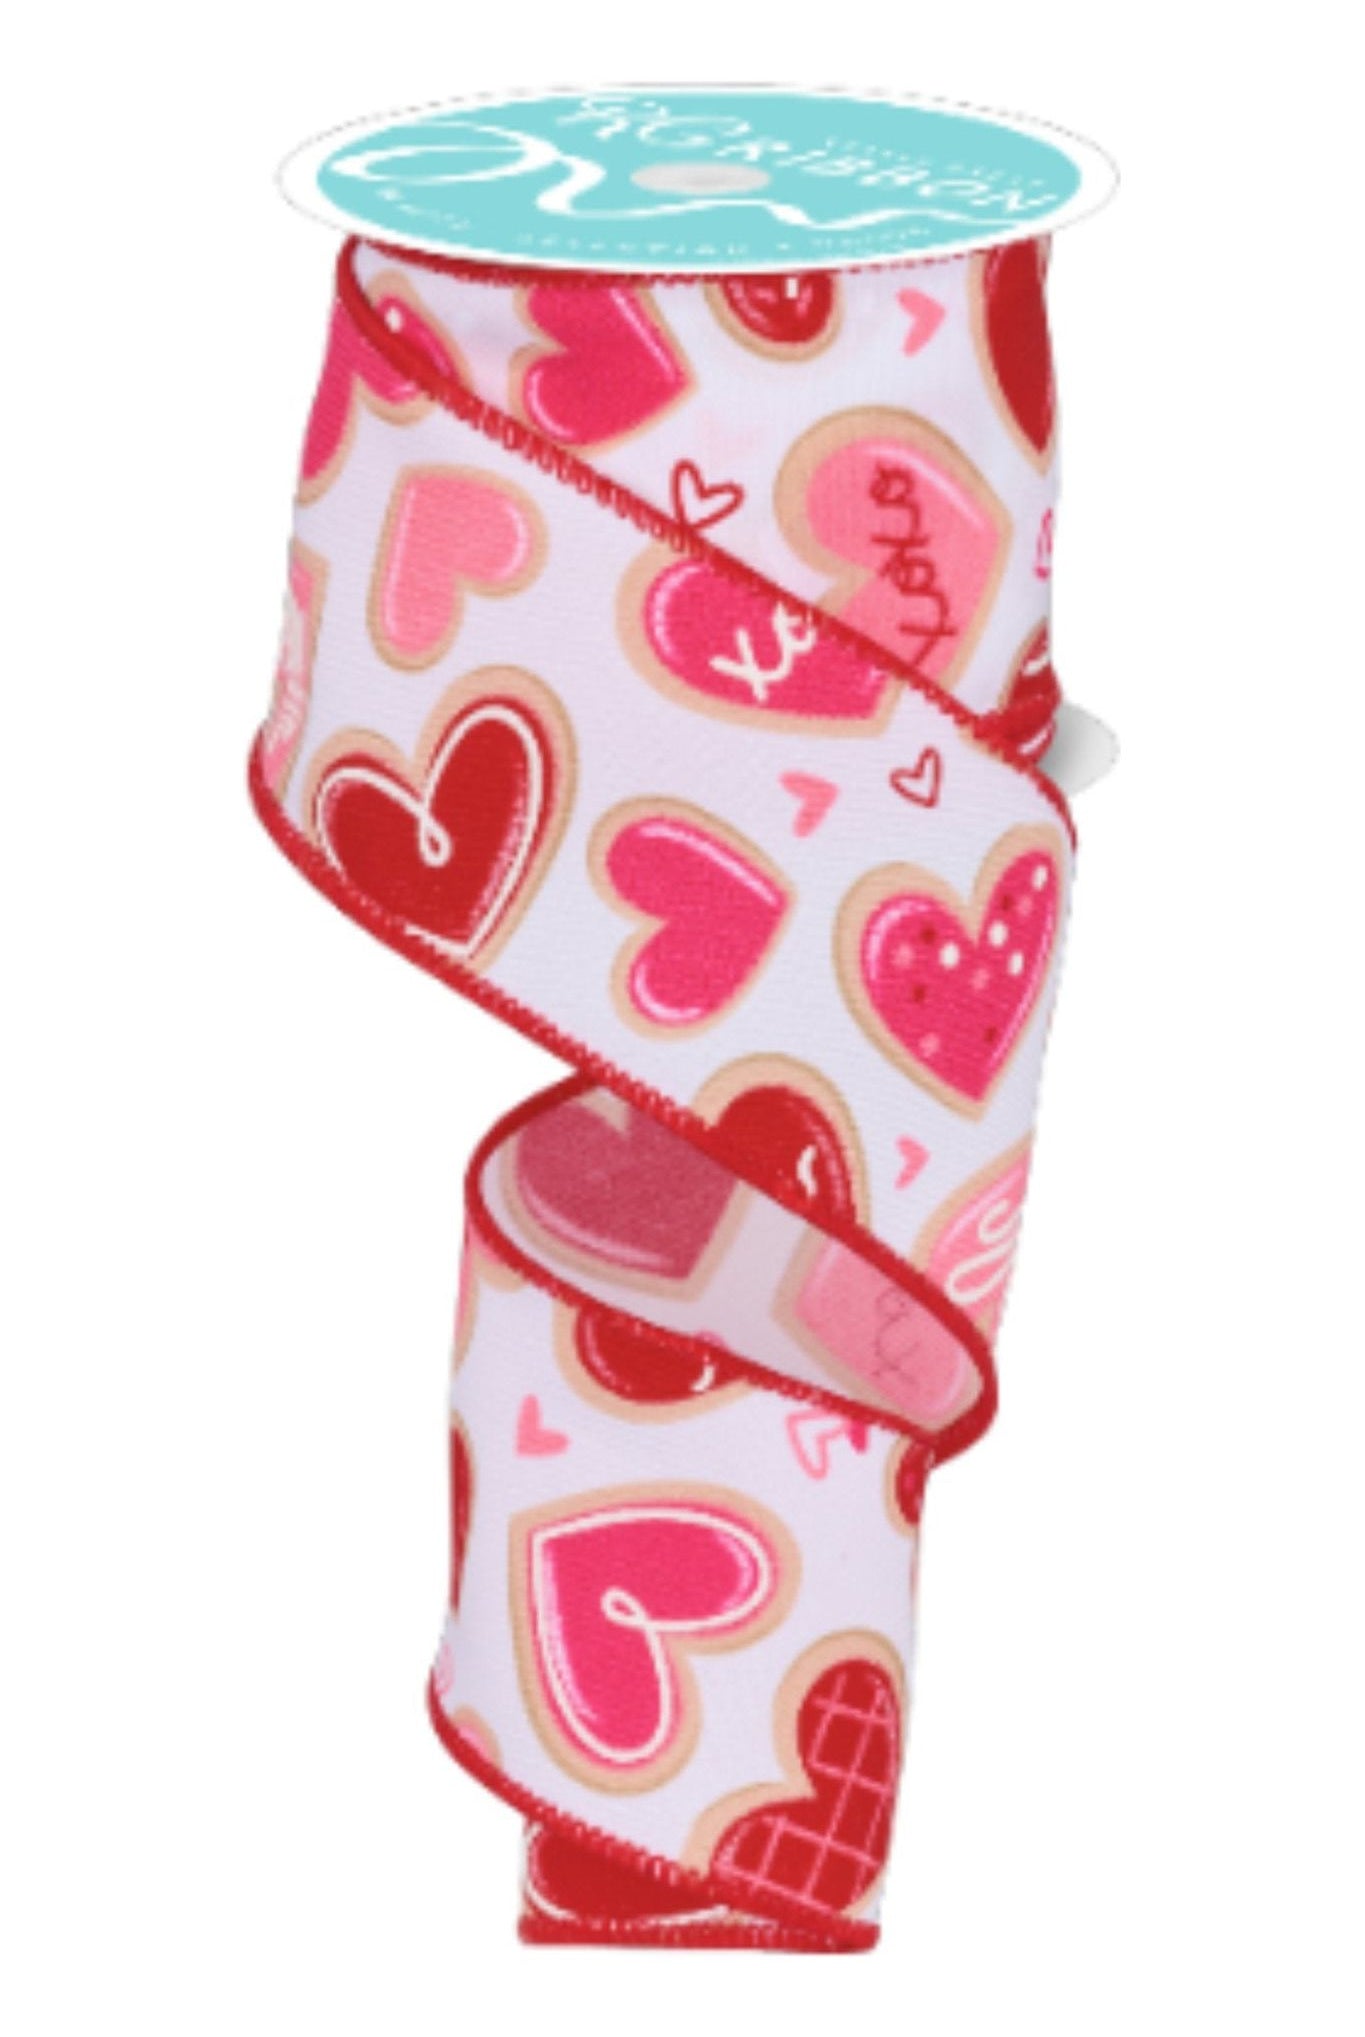 Shop For 2.5" Valentine Cookie Ribbon: White (10 Yard) RGF117427